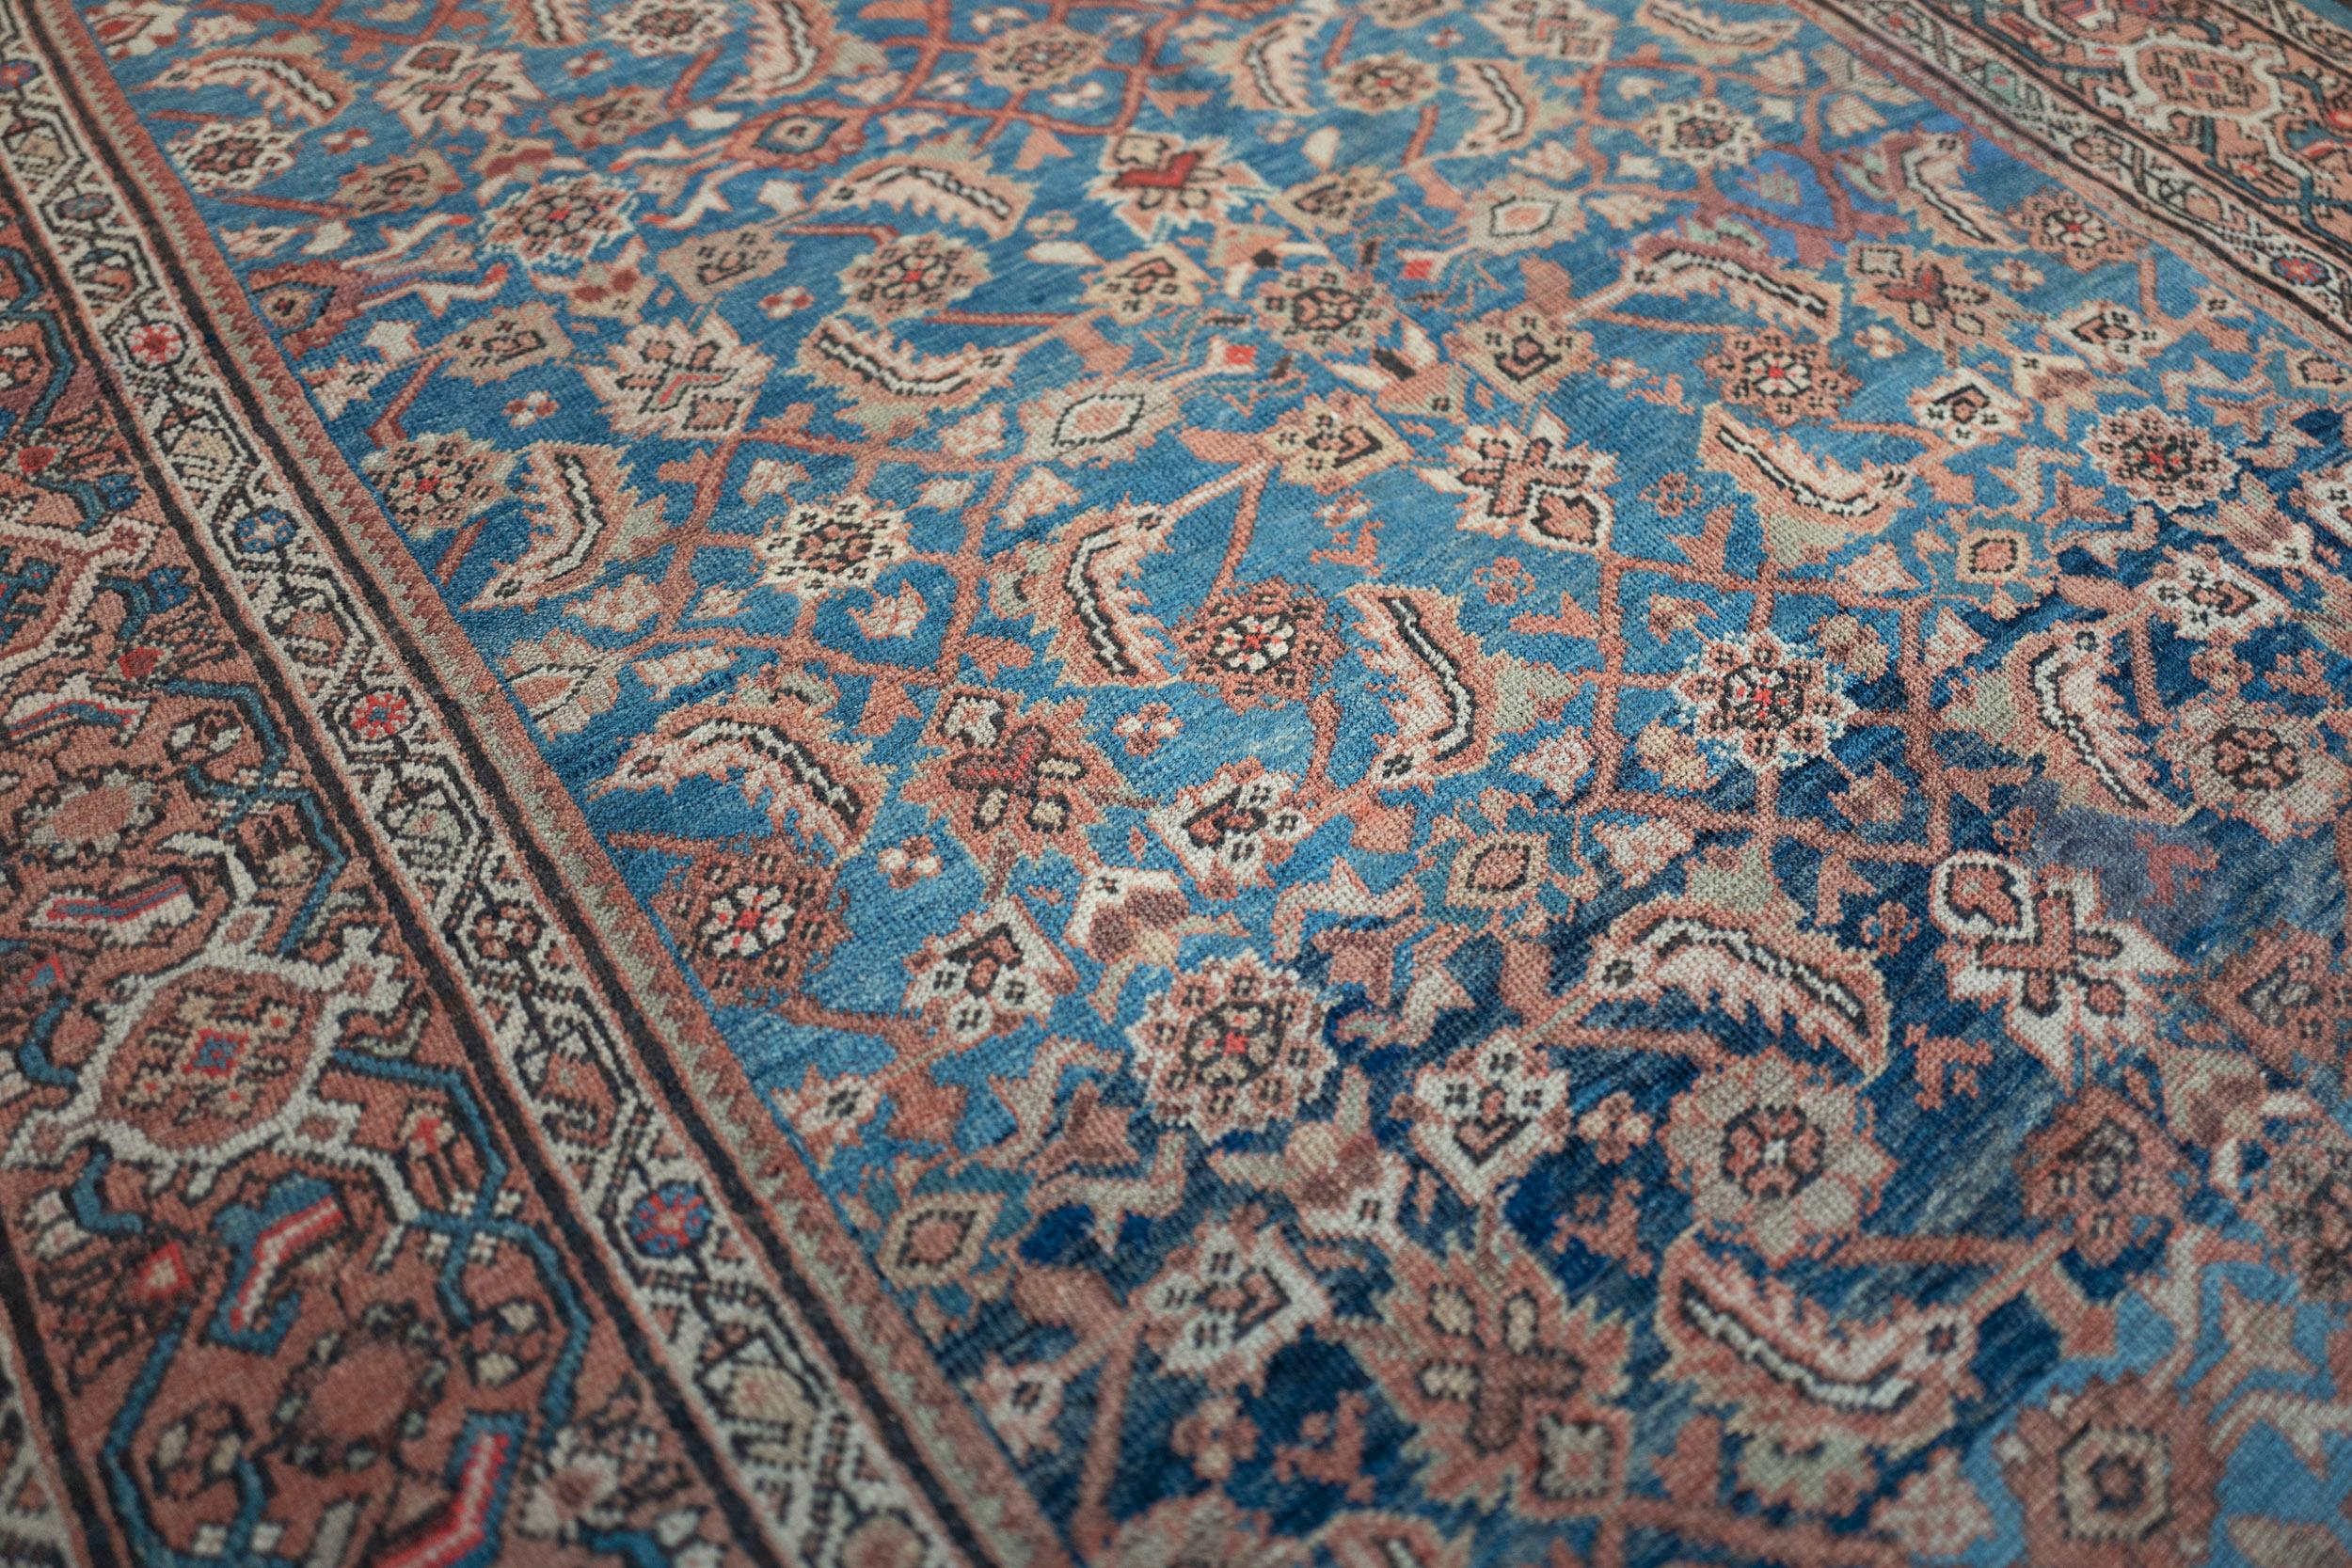 This traditional handwoven Persian Sultanabad rug has a shaded lake blue field with overall herati pattern, in a shaded apricot interlocking turtle palmette border, between delicate ivory paisley stripes.

The city of Sultanabad (now known as Arak)